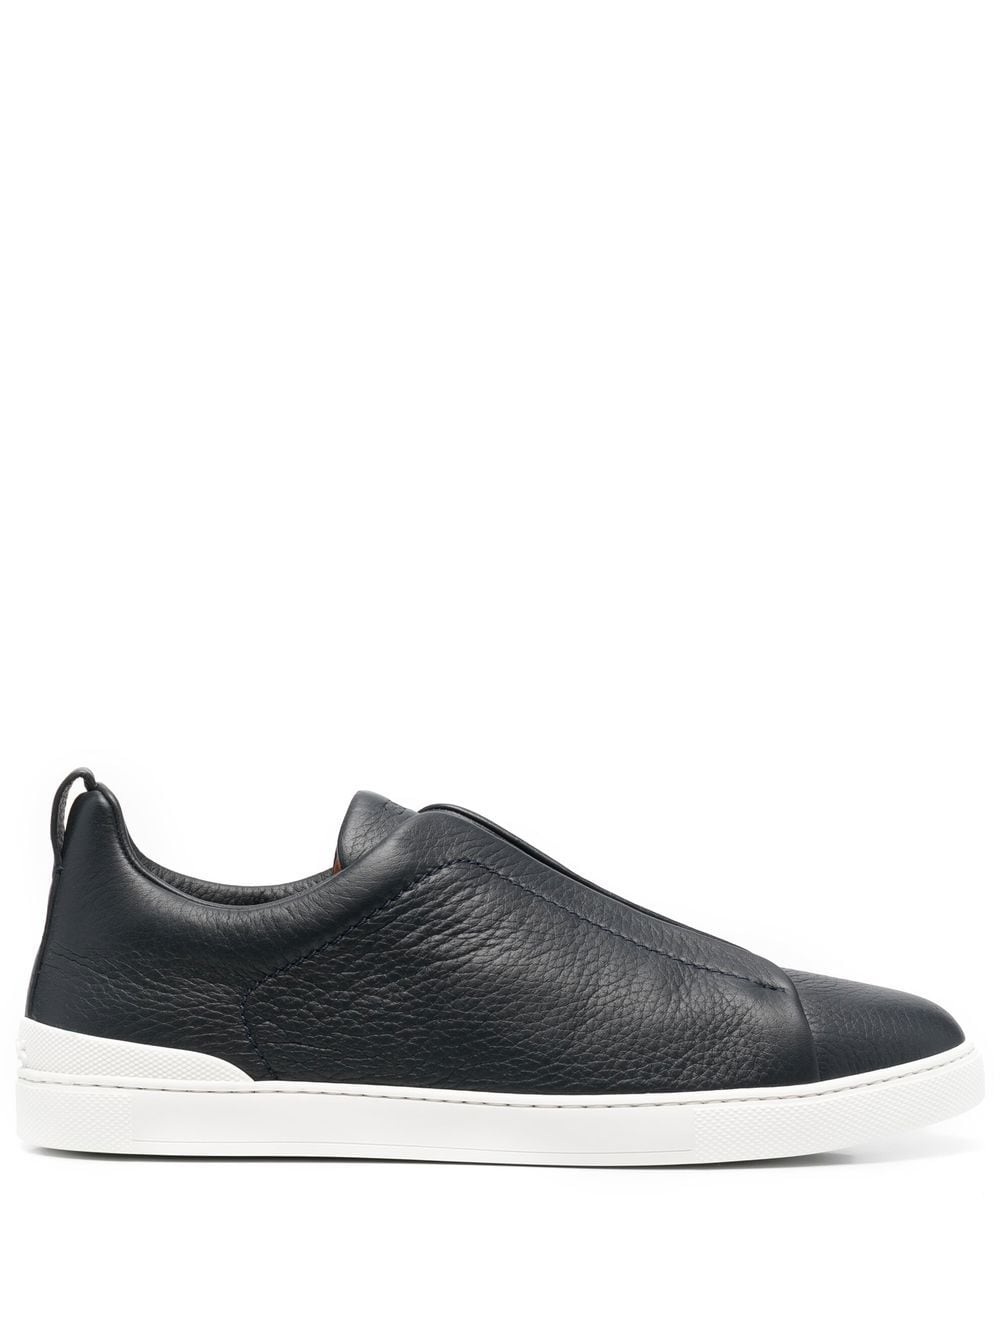 Slip-on leather sneakers<BR/><BR/><BR/>